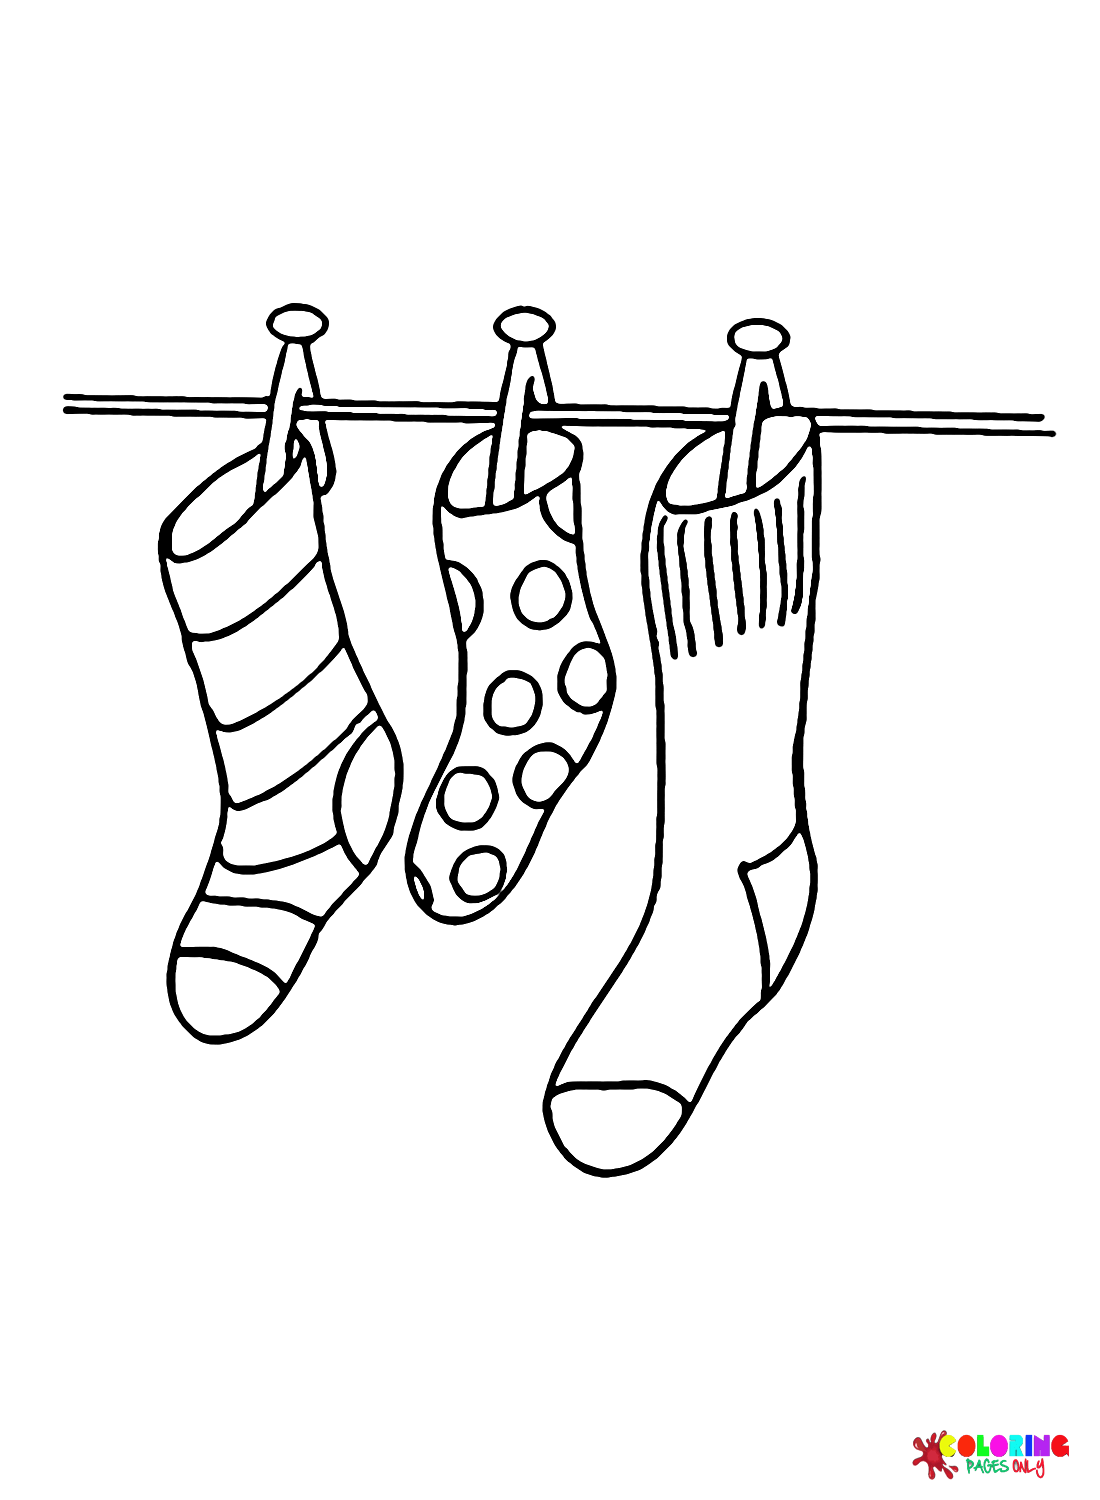 Socks Hanging Coloring Page - Free Printable Coloring Pages